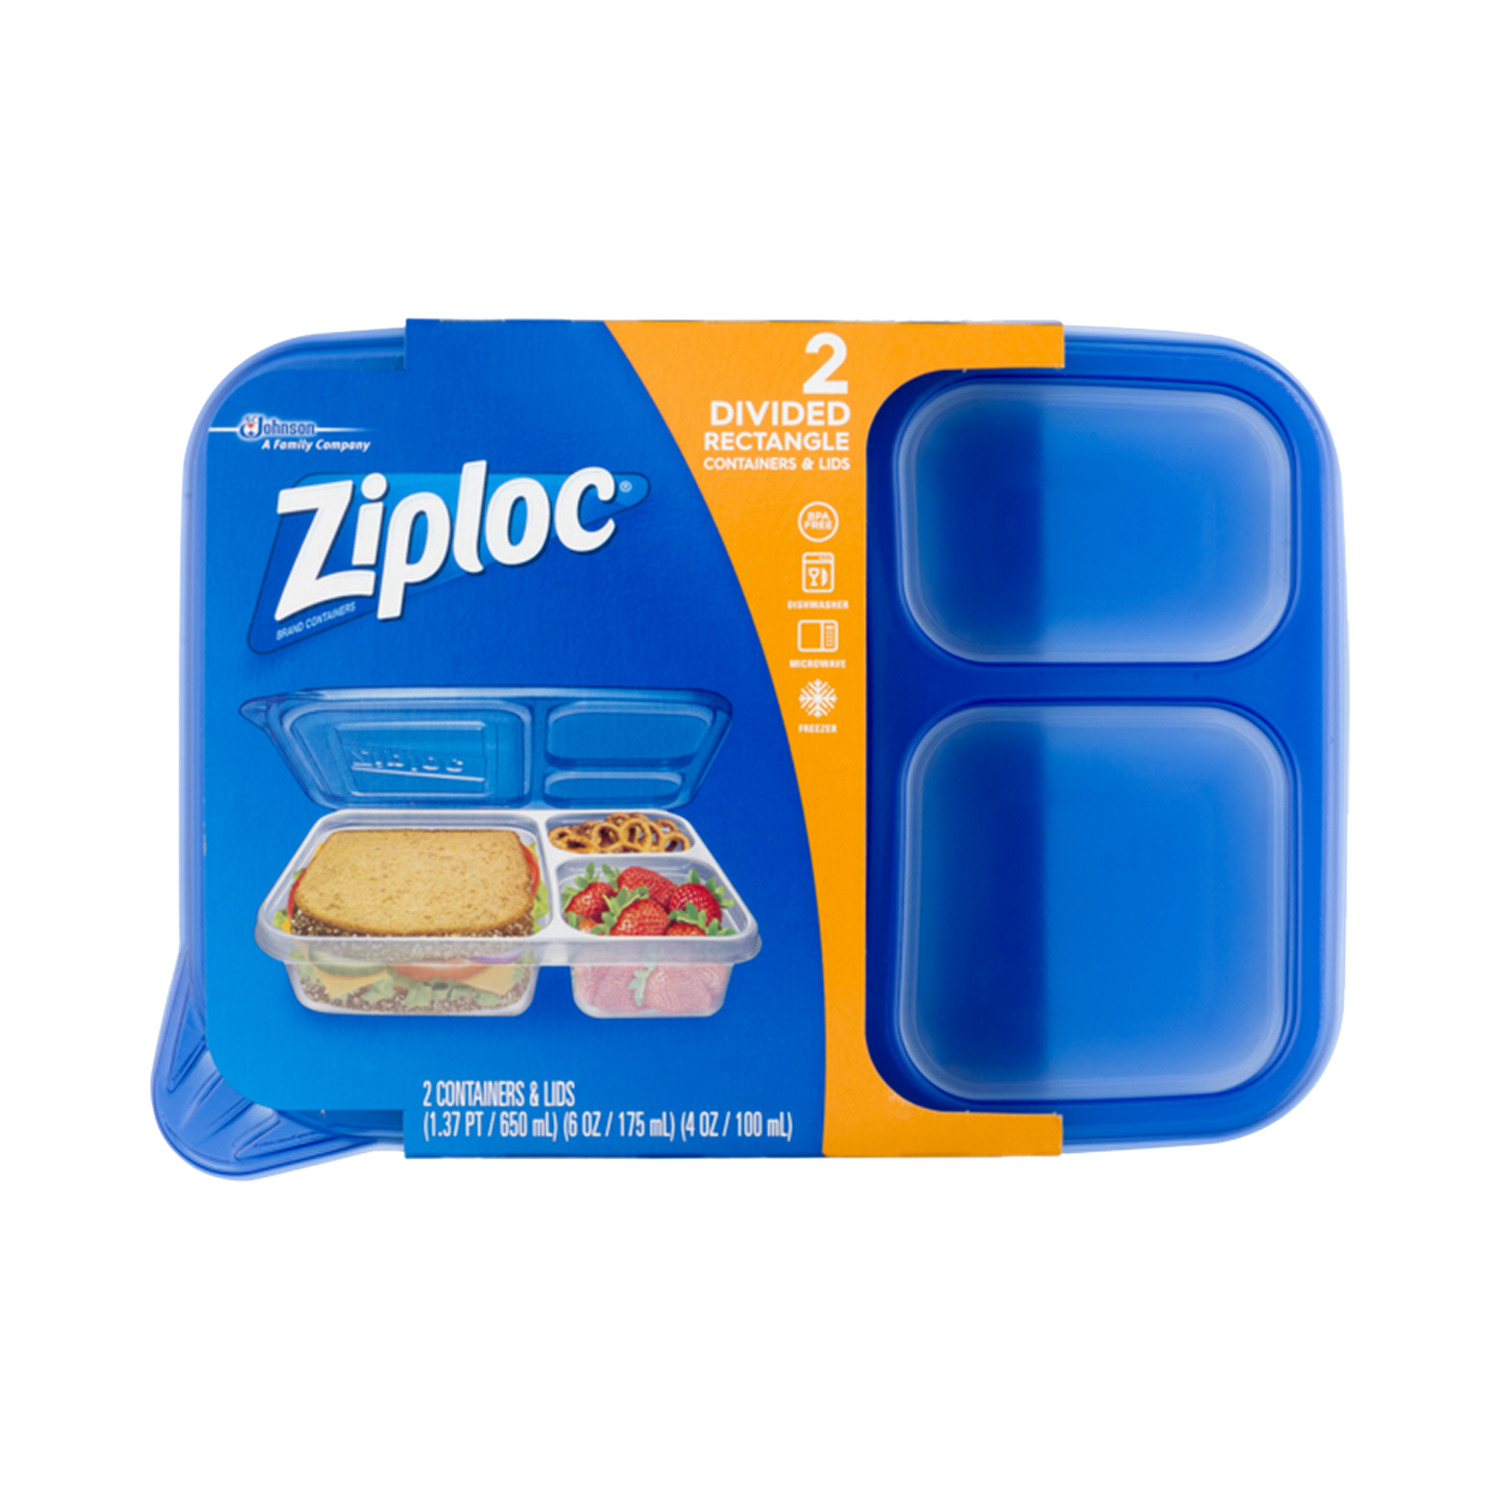 https://www.rossy.ca/media/A2W/products/ziploc-divided-rectangle-containers-and-lids-pk-of-2-86738-3.jpg